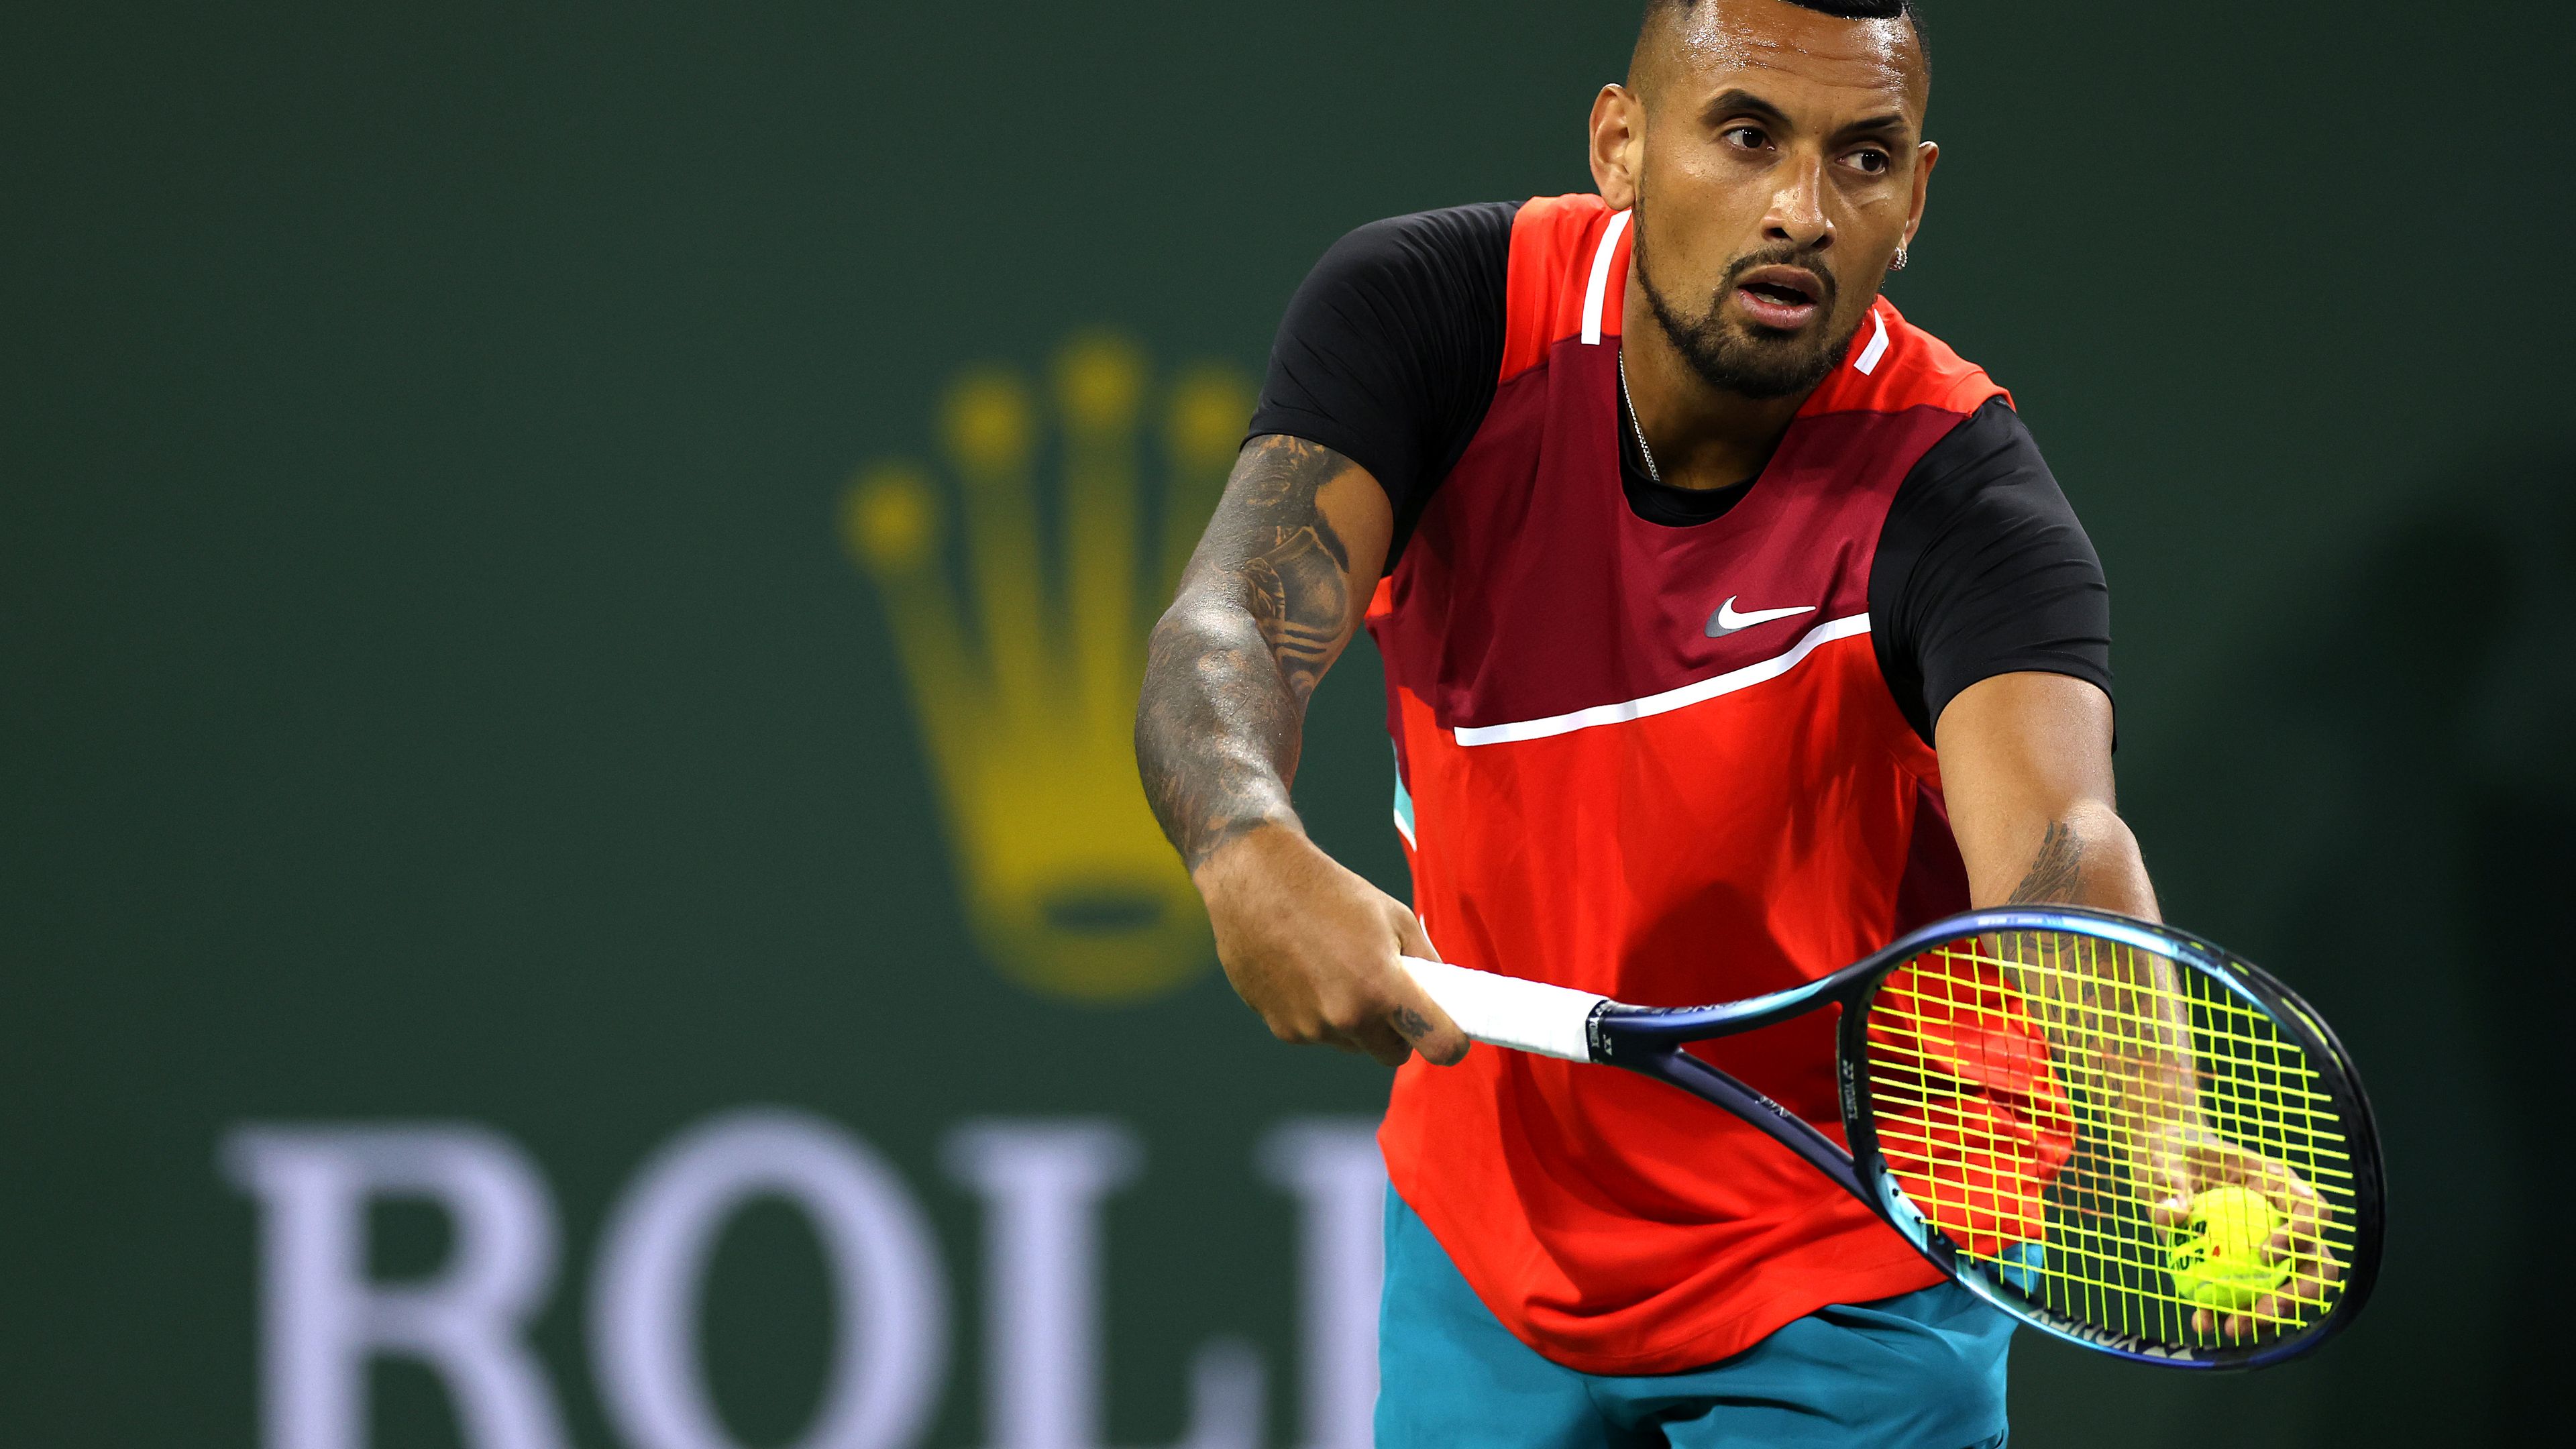 Nick Kyrgios advances to quarter-finals at US Clay Court Championships, ends five-year drought